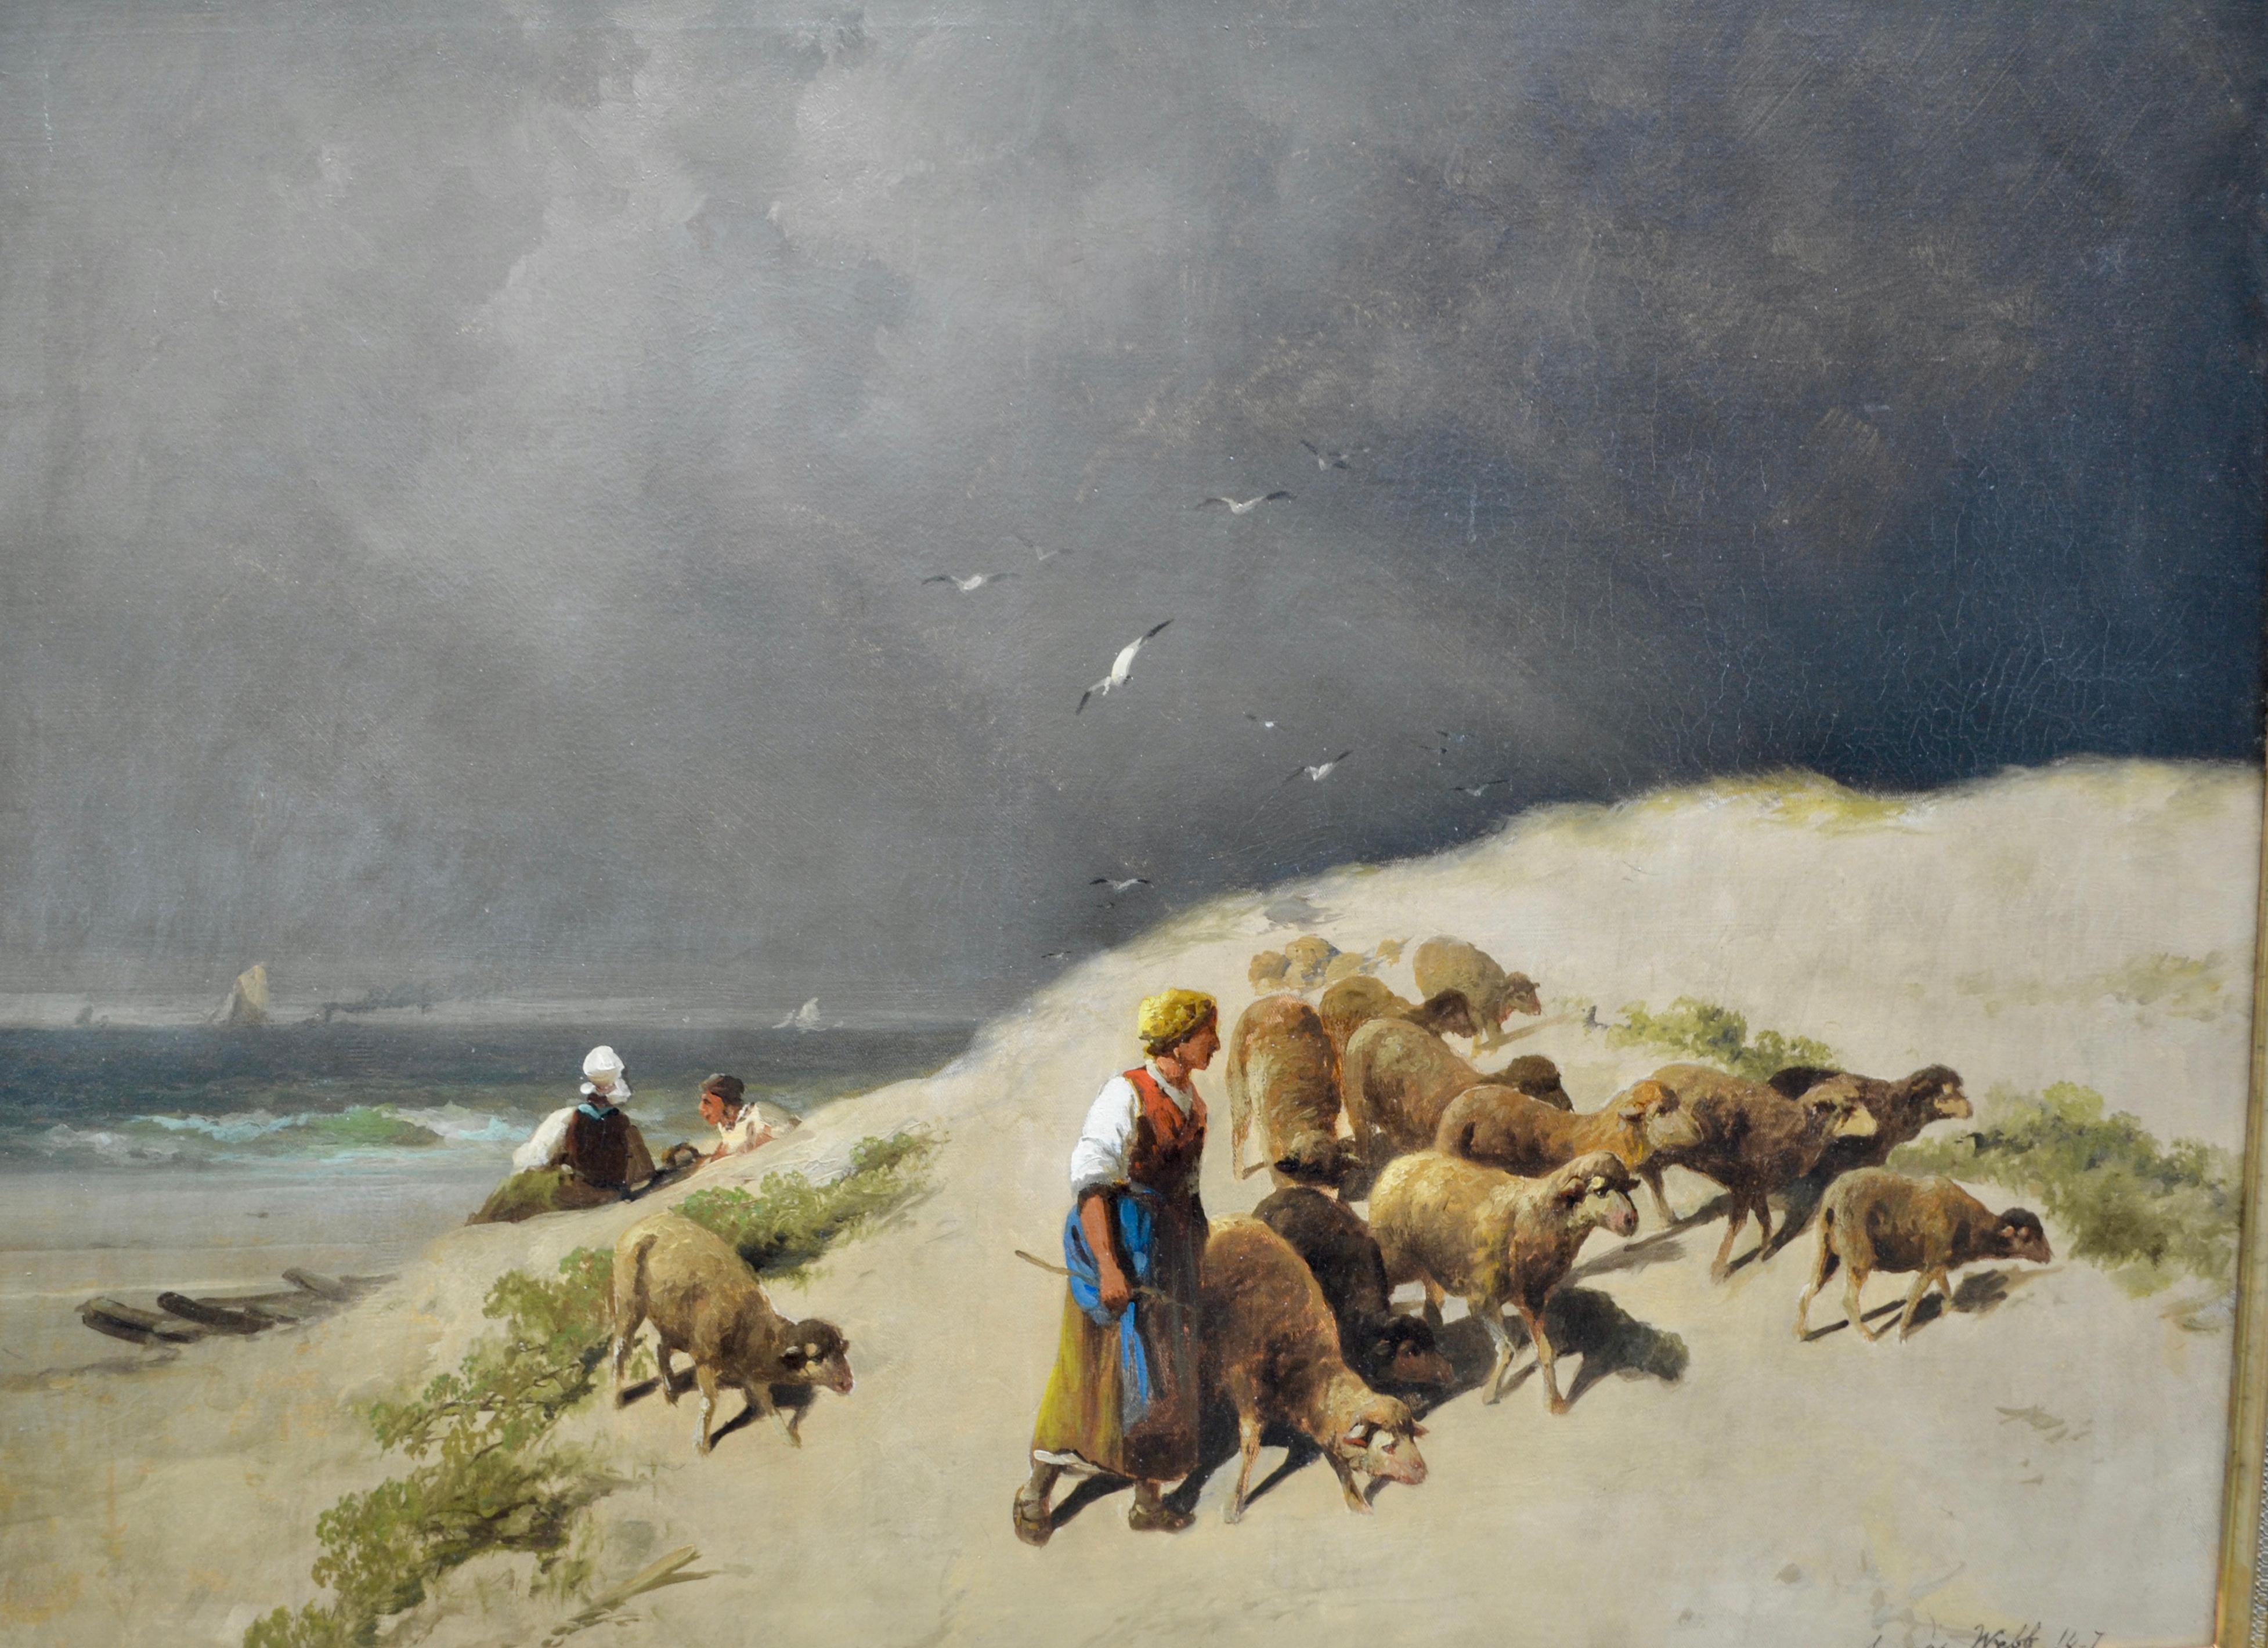 An atmospheric oil painting depicting a seaside with sunlit high sand dunes in the forefront and in Stark contrast a dark stormy sky in the background with seagulls overhead. Small sailing ships can be seen in the distance. Climbing the dunes is a